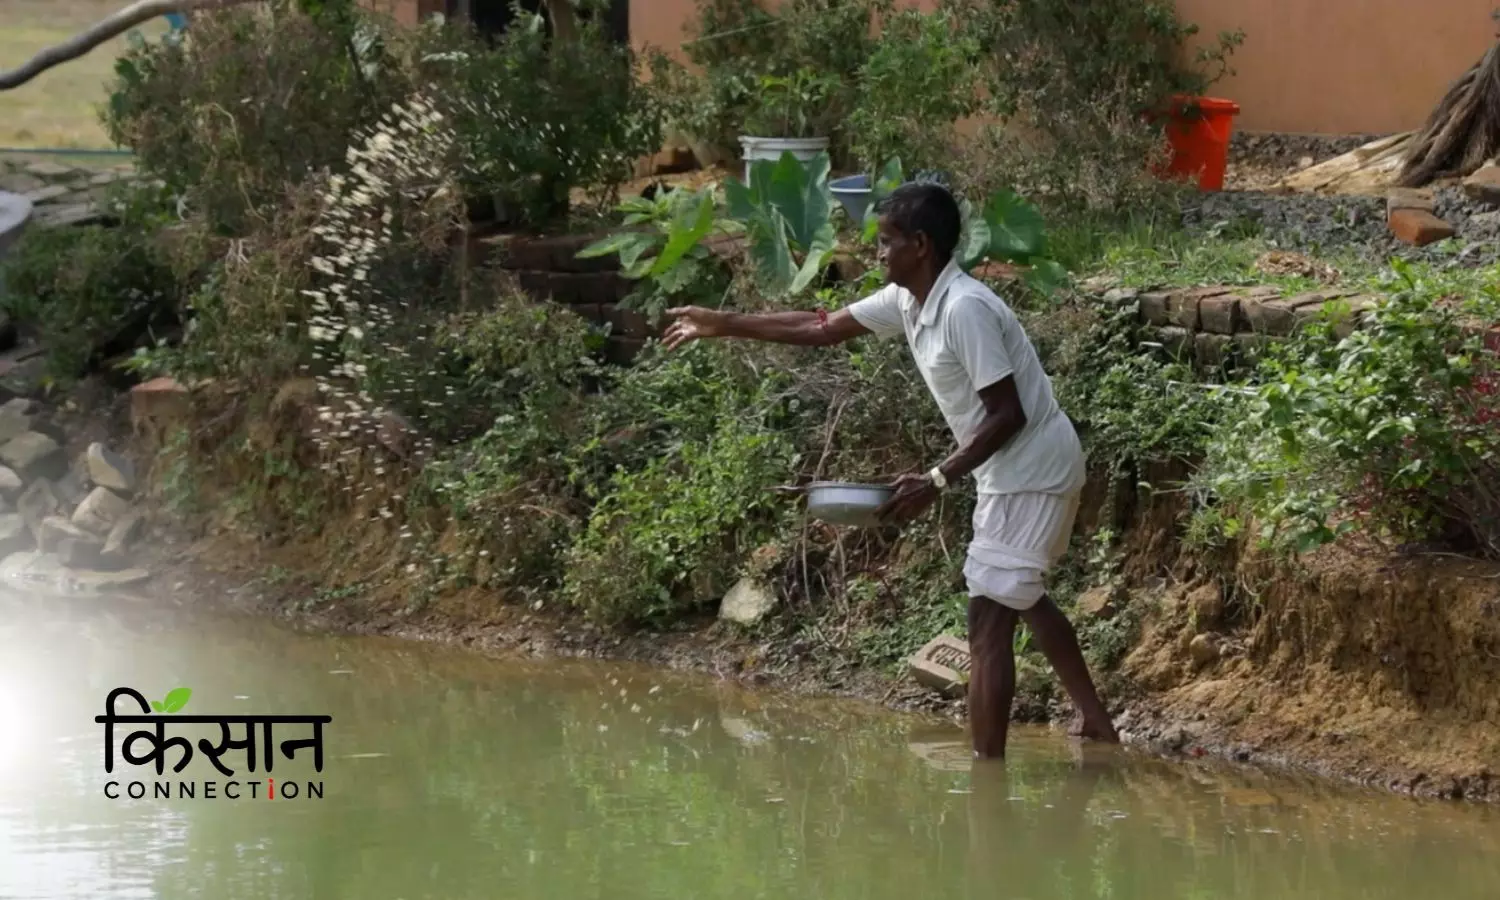 Fishery, Duckery, Veg & Fruit Cultivation – Integrated Farming Transforming Lives of Small Farmers in Jharkhand